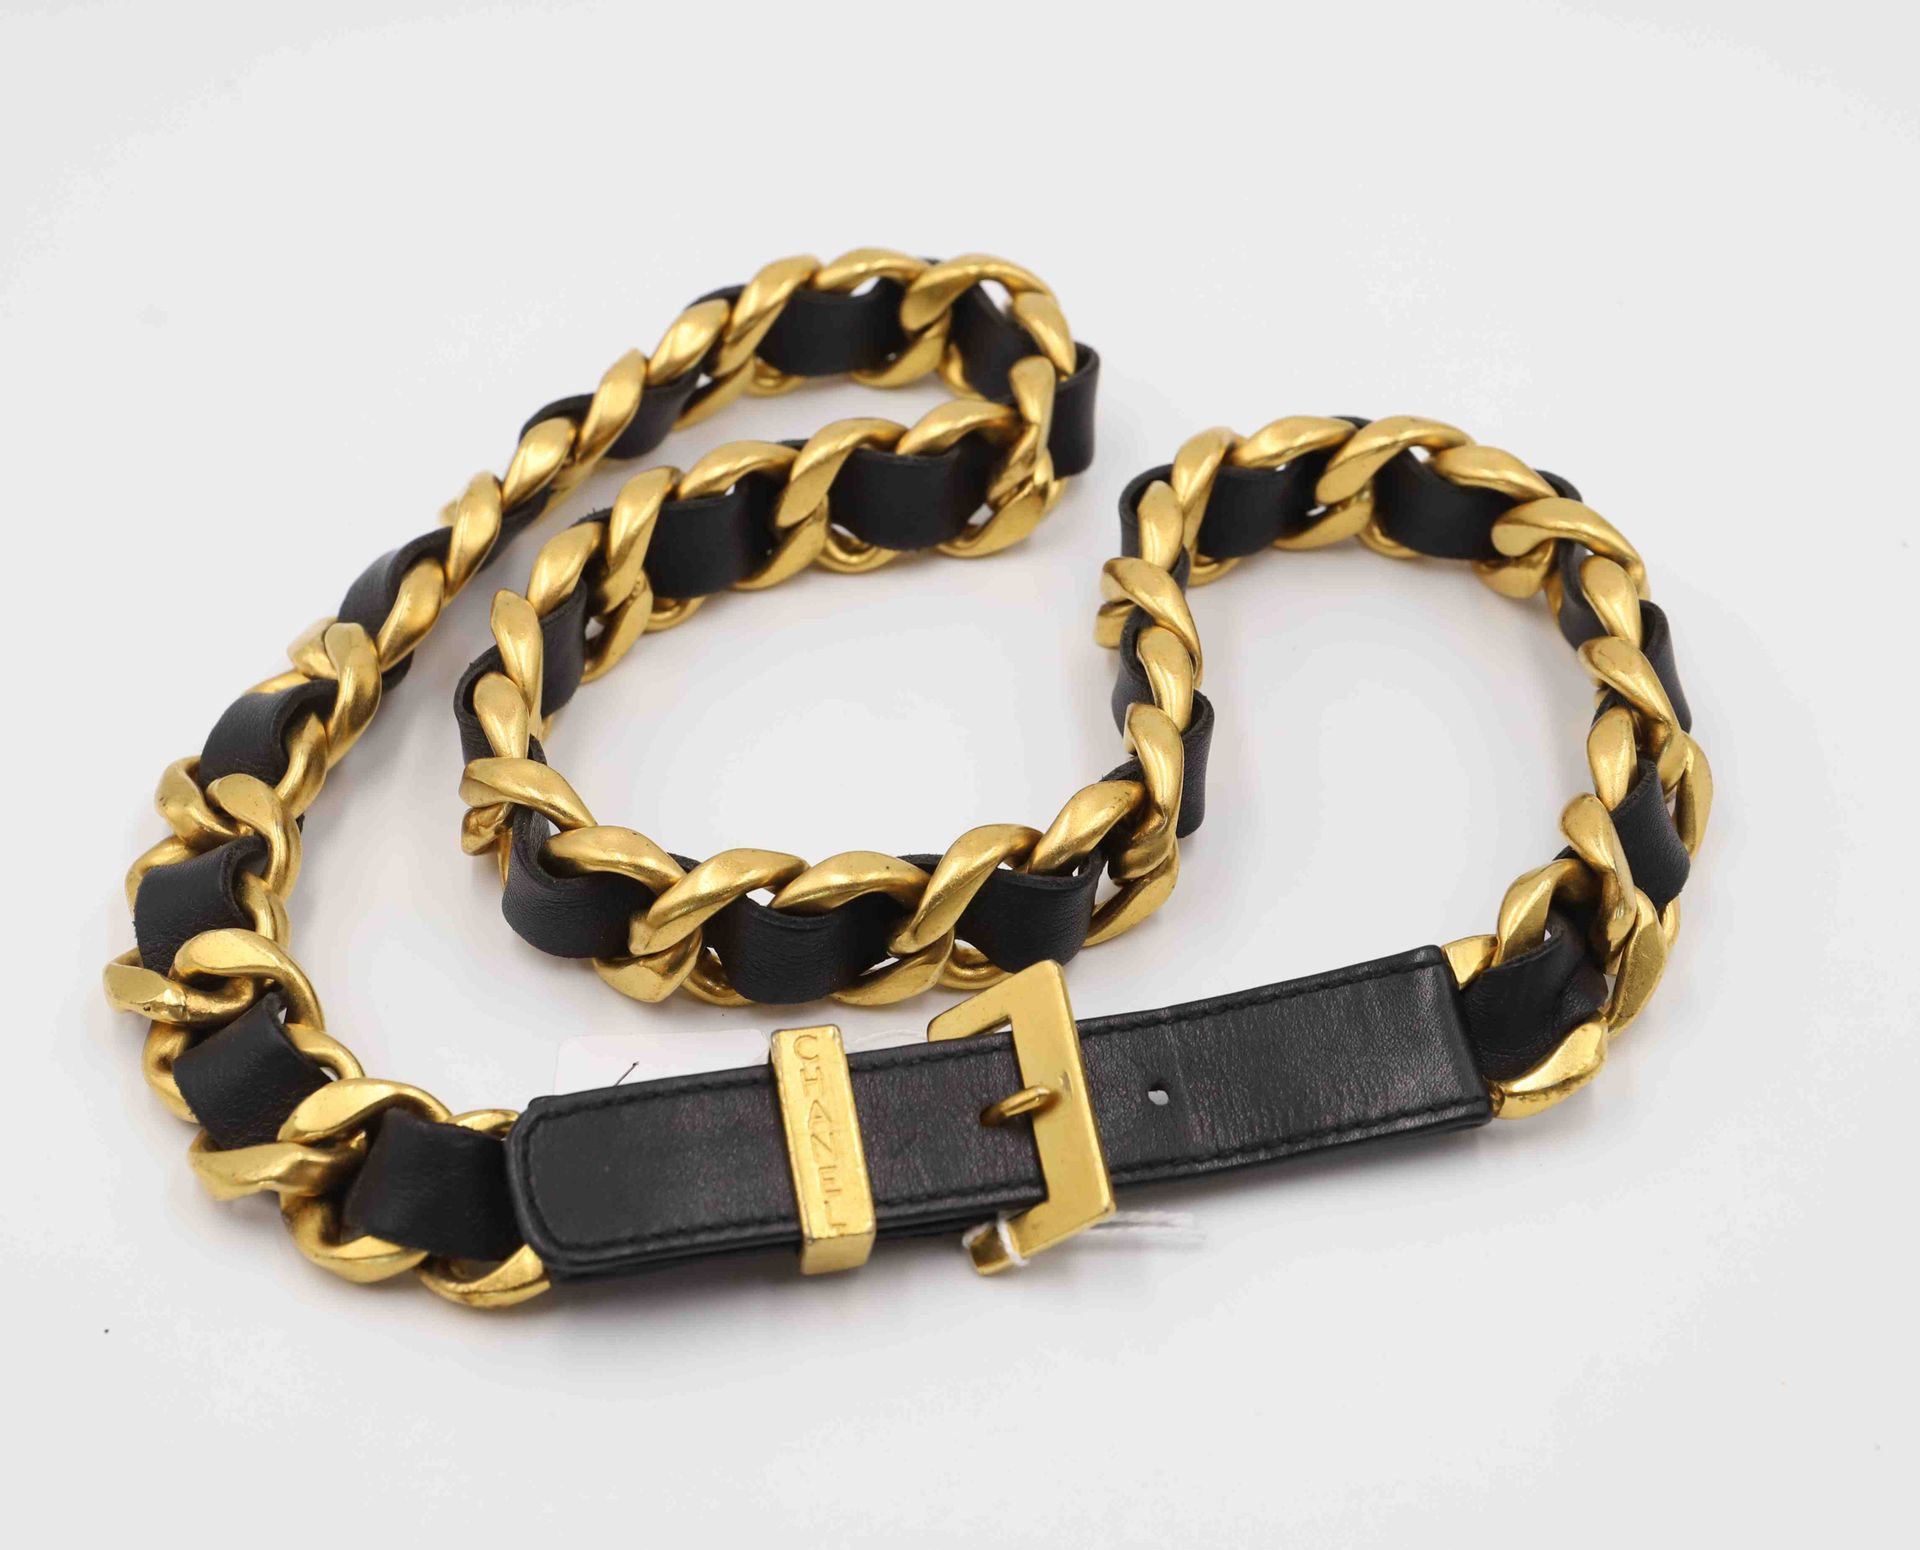 Null CHANEL Belt
Leather and gold metal chain
Size: 80 cm